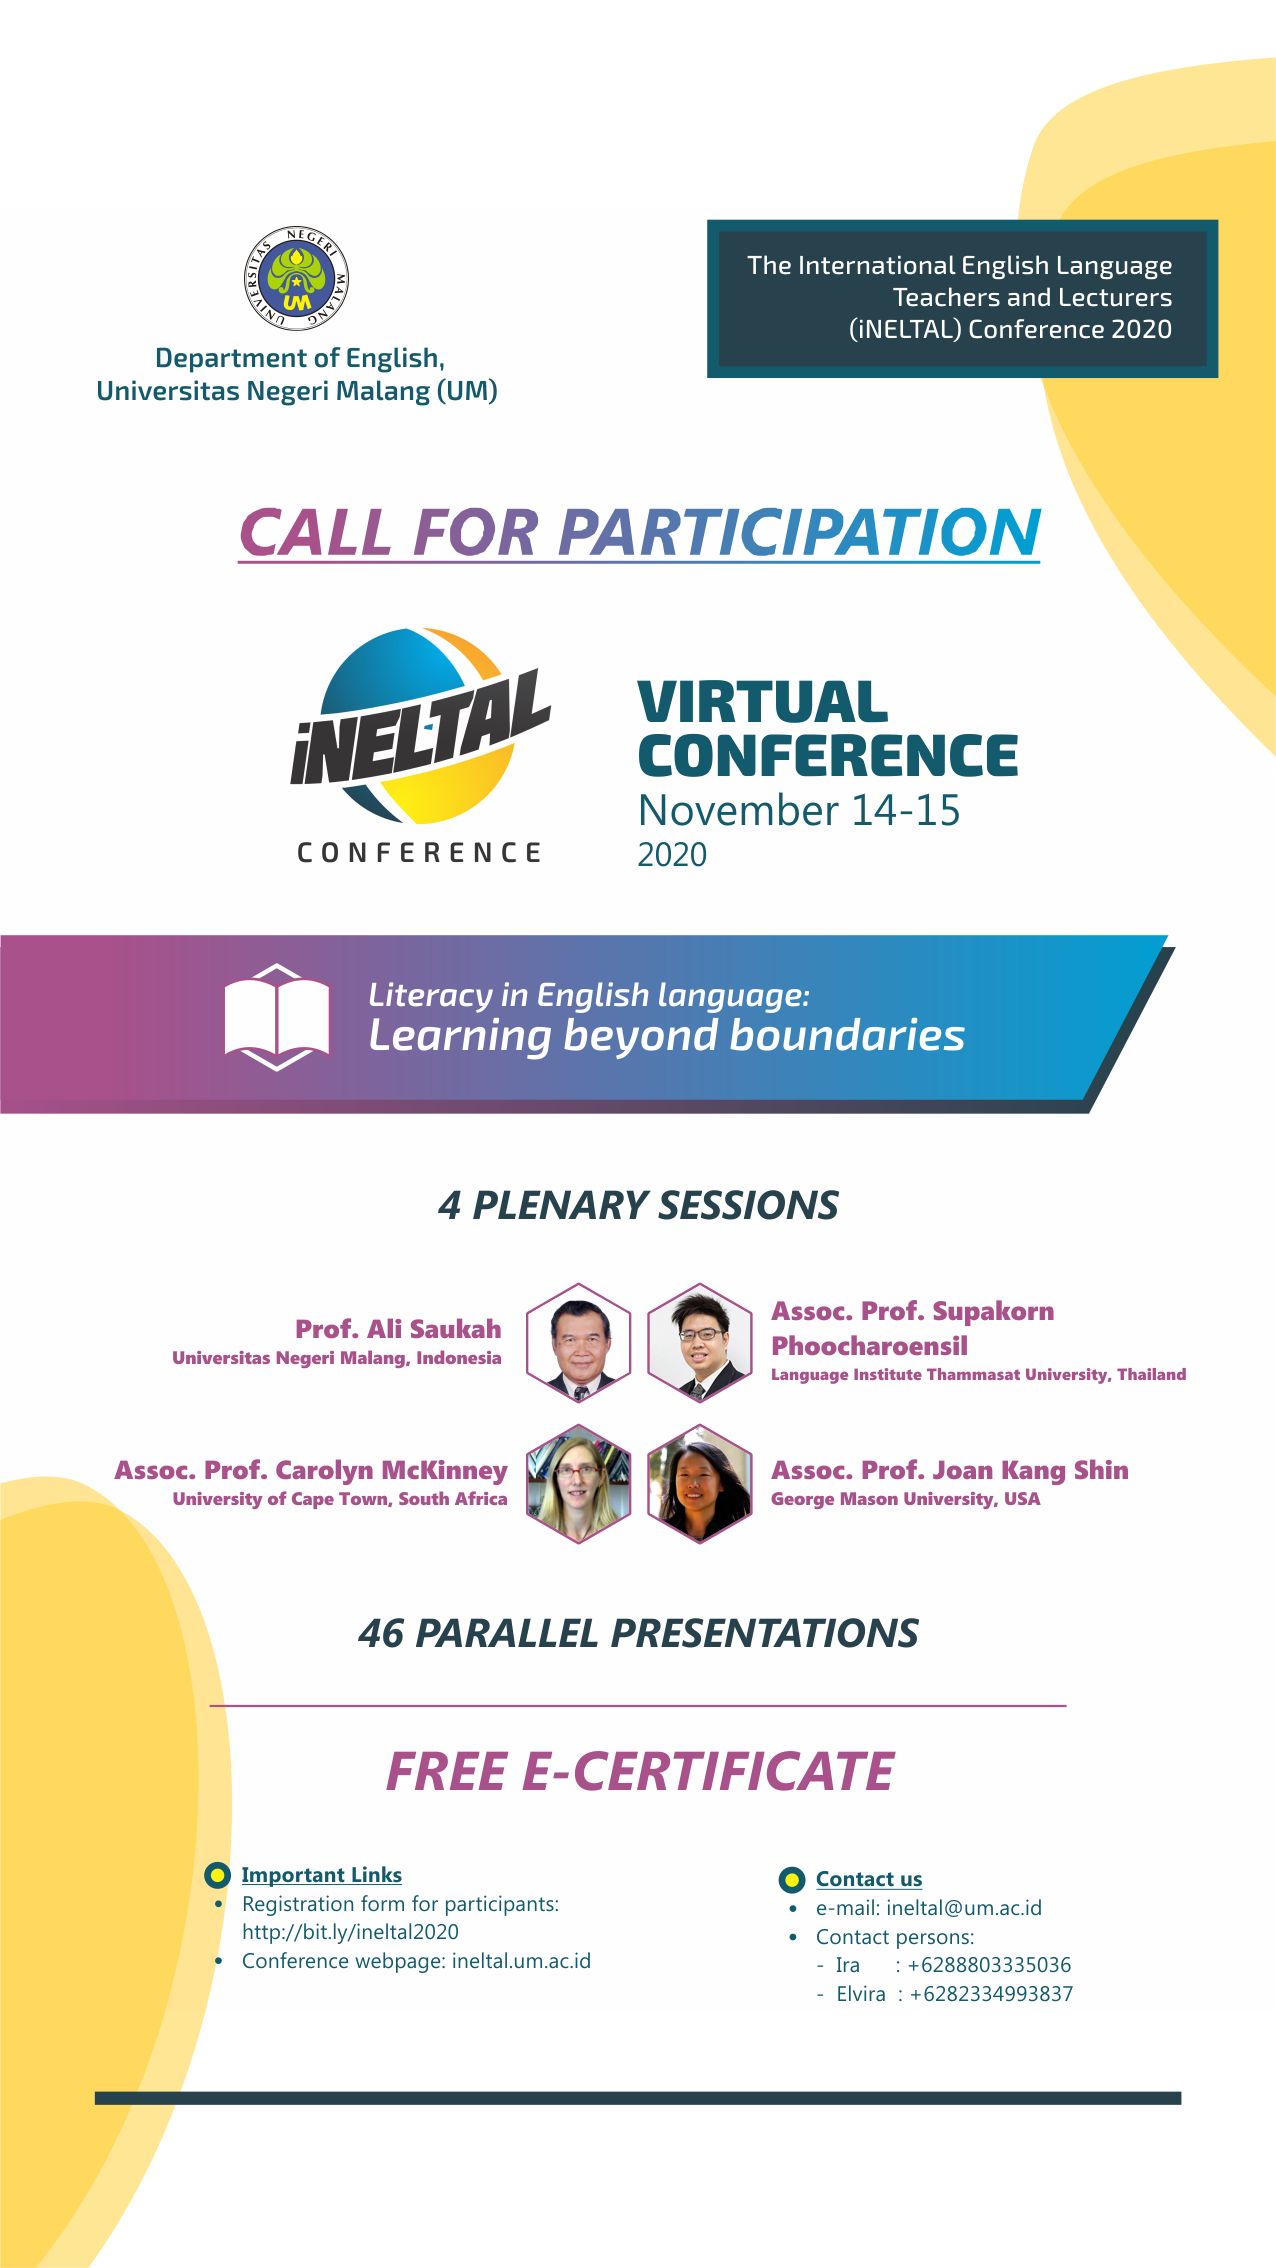 iNELTAL 2020 VIRTUAL CONFERENCE Call For Papers